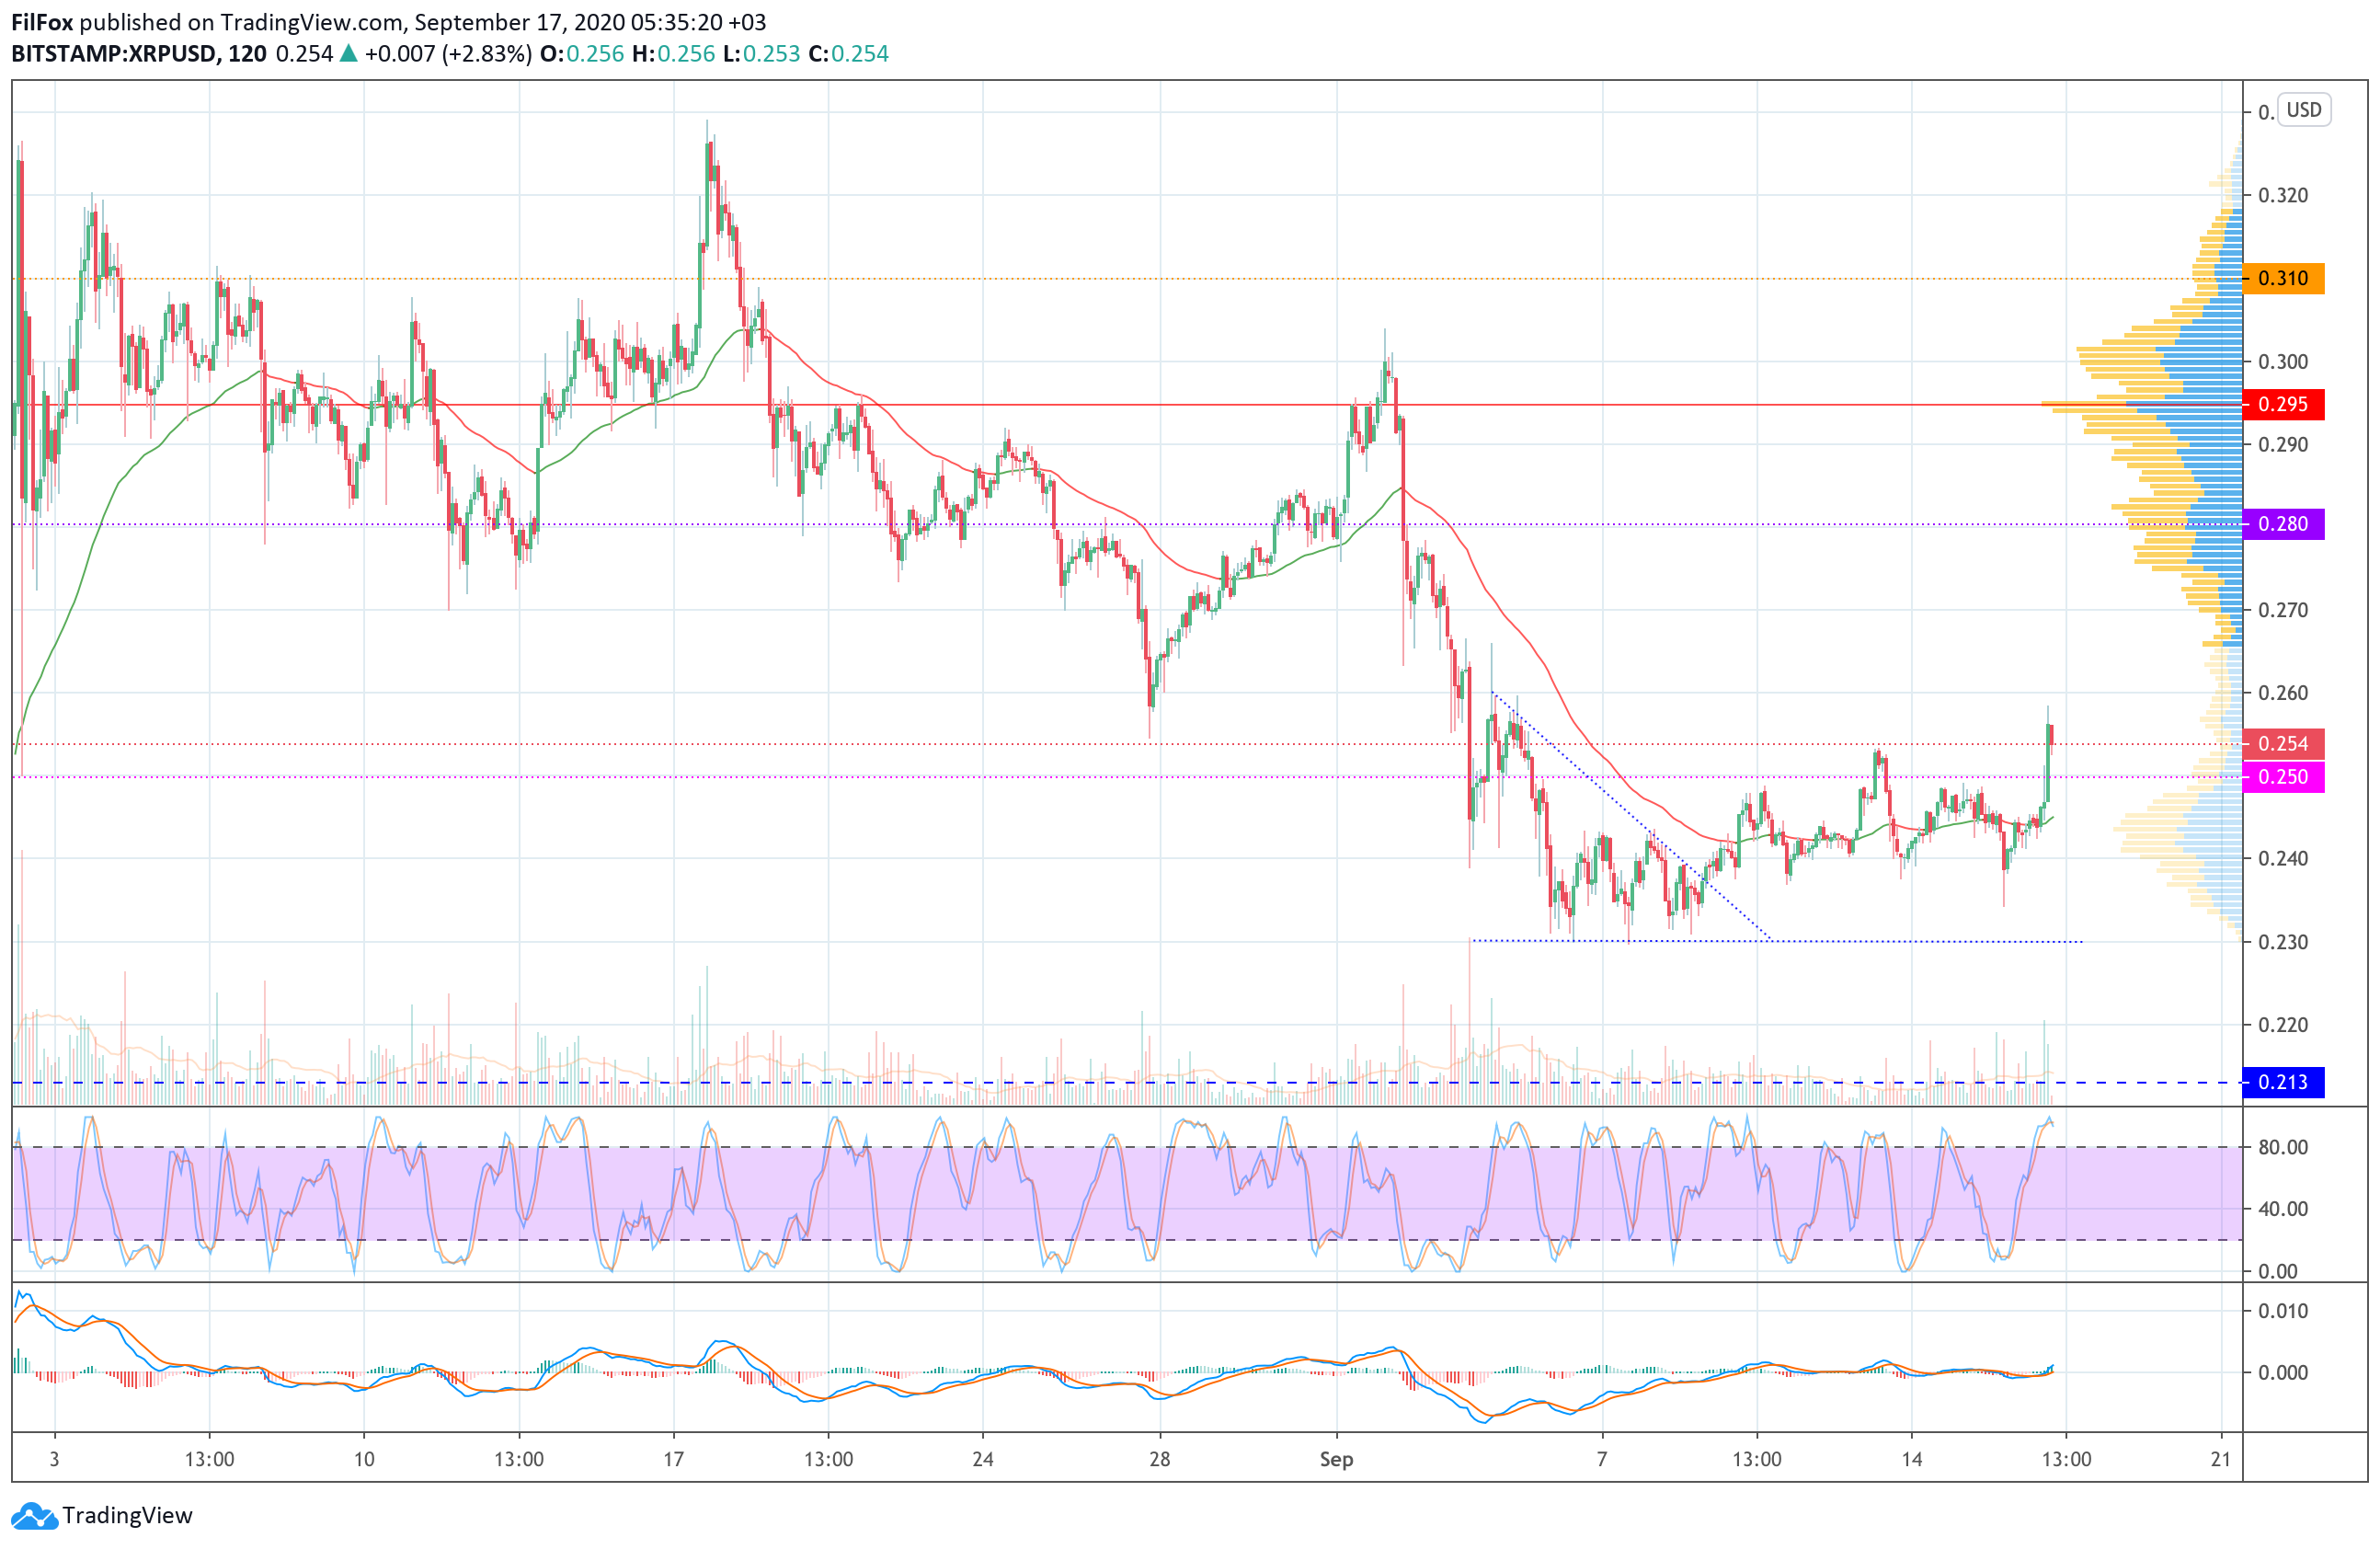 Analysis of prices for Bitcoin, Ethereum, XRP for 09/17/2020